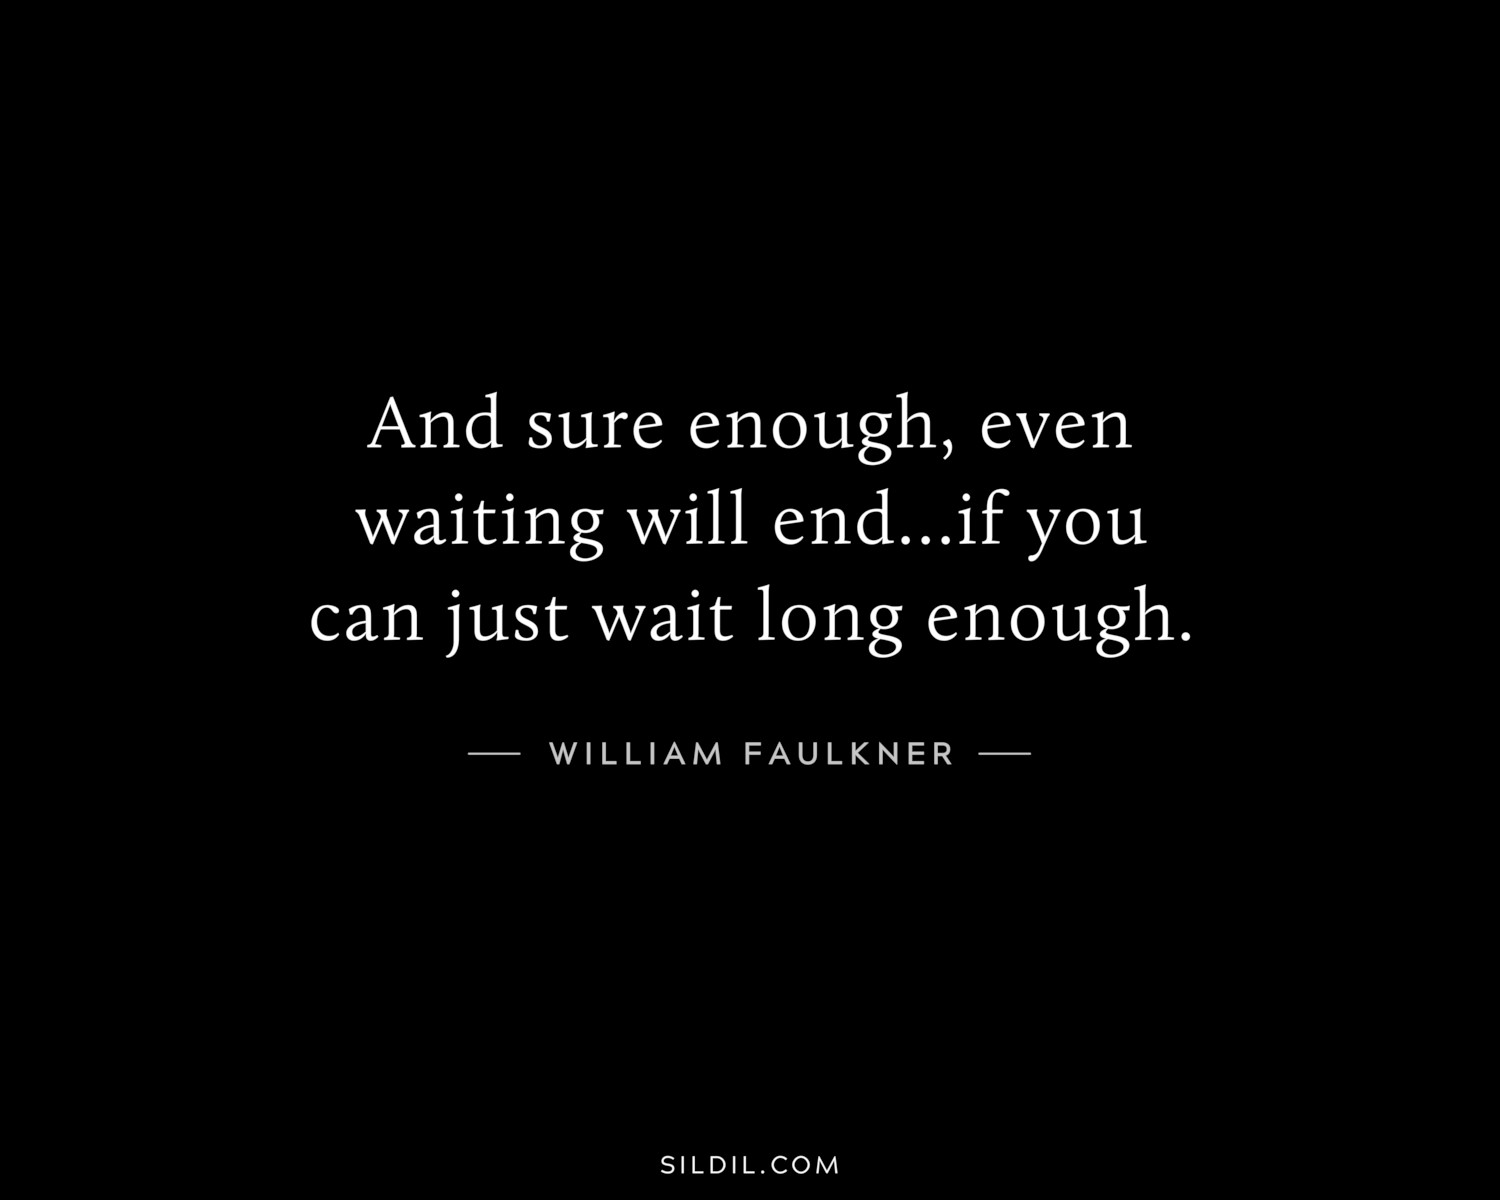 And sure enough, even waiting will end…if you can just wait long enough.